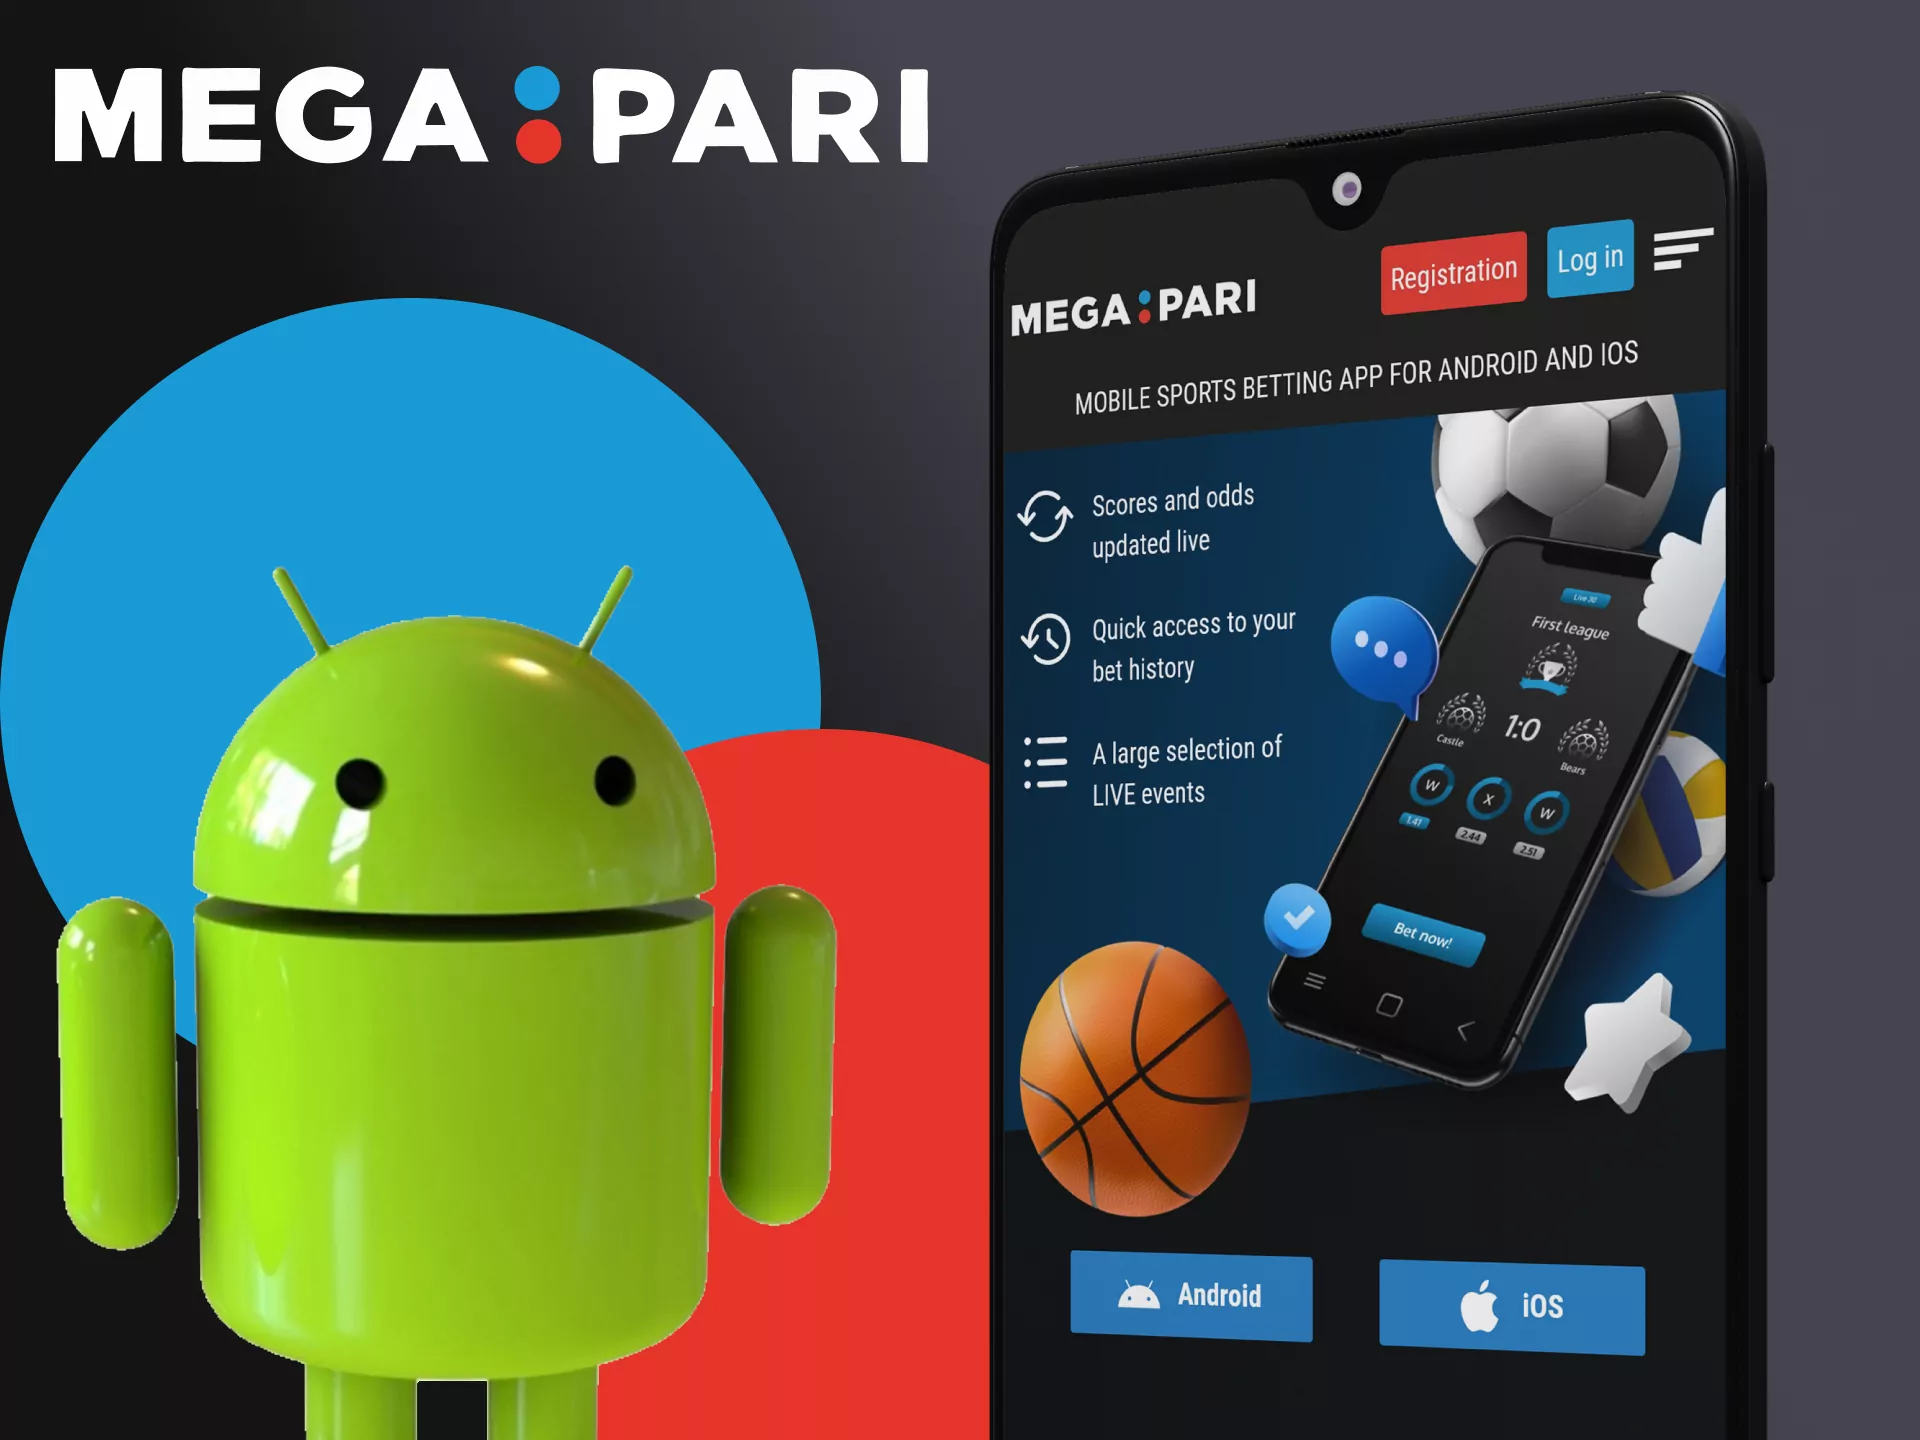 Install the Megapari app for your Android device.